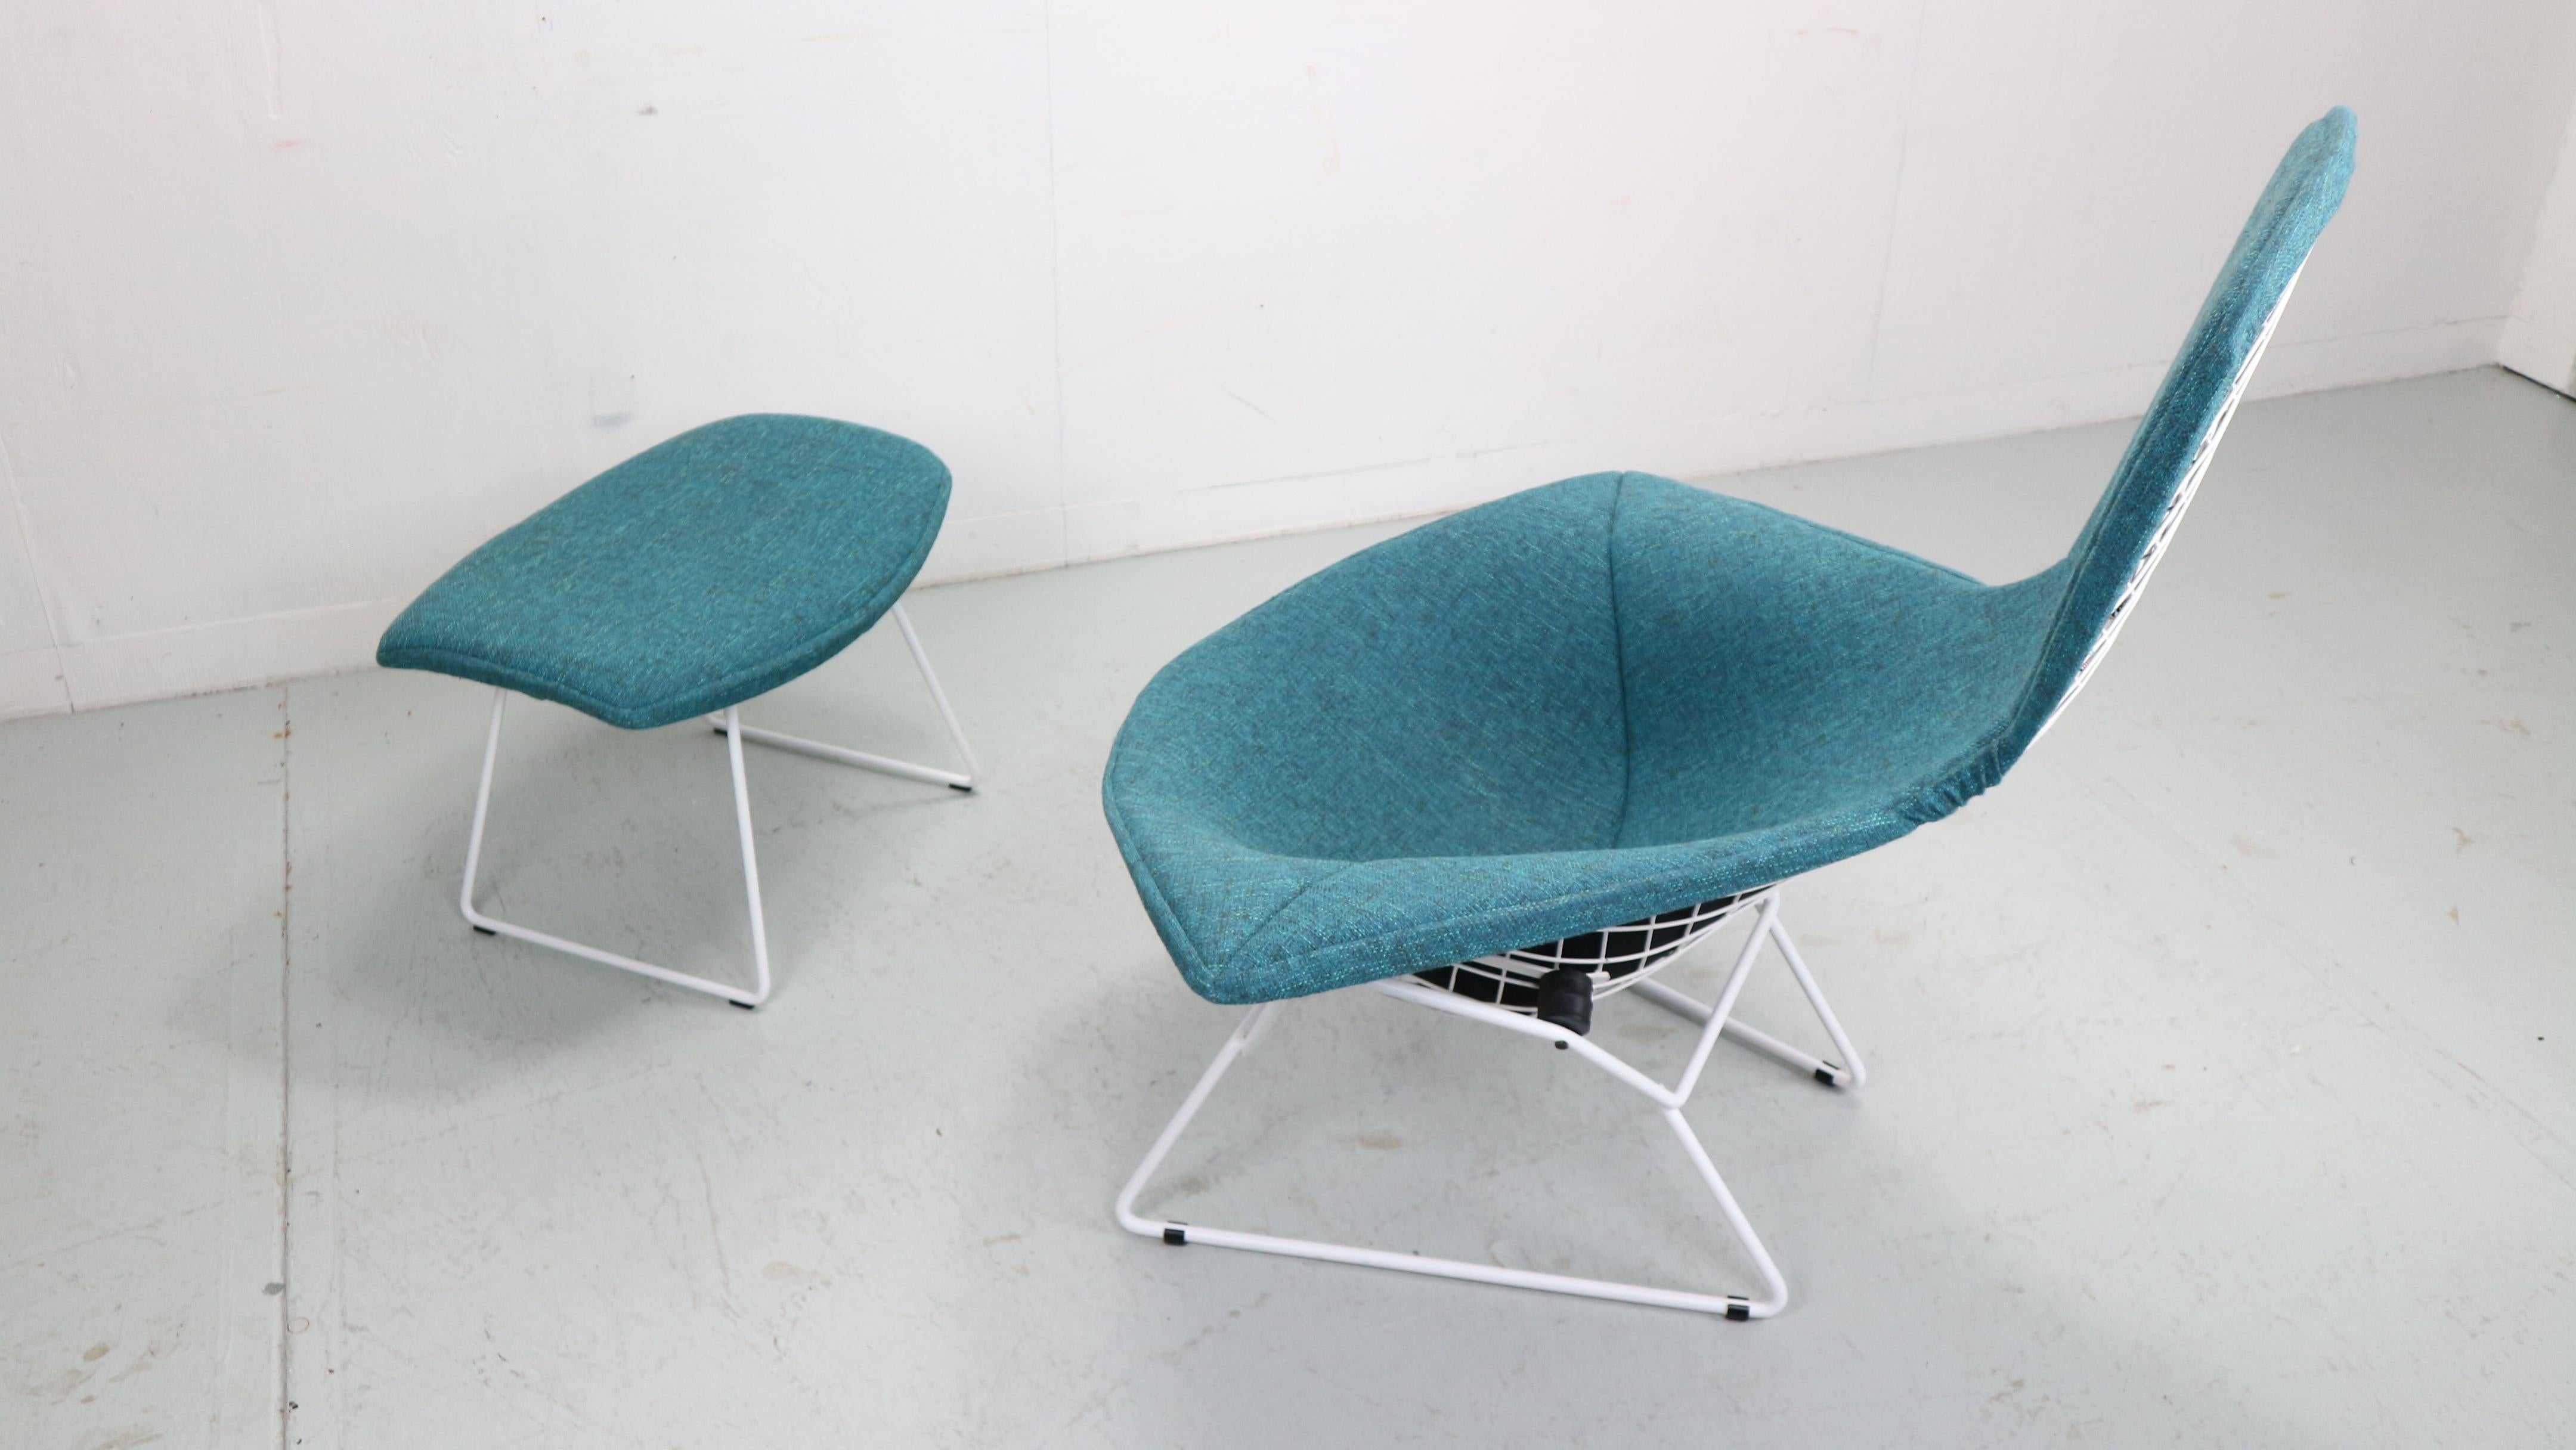 Harry Bertoia for Knoll International bird chair and ottoman. This iconic lounge chair and ottoman were originally designed by Harry Bertoia in 1952 and manufactured by Knoll International. Both newly upholstered and in good condition. Made of